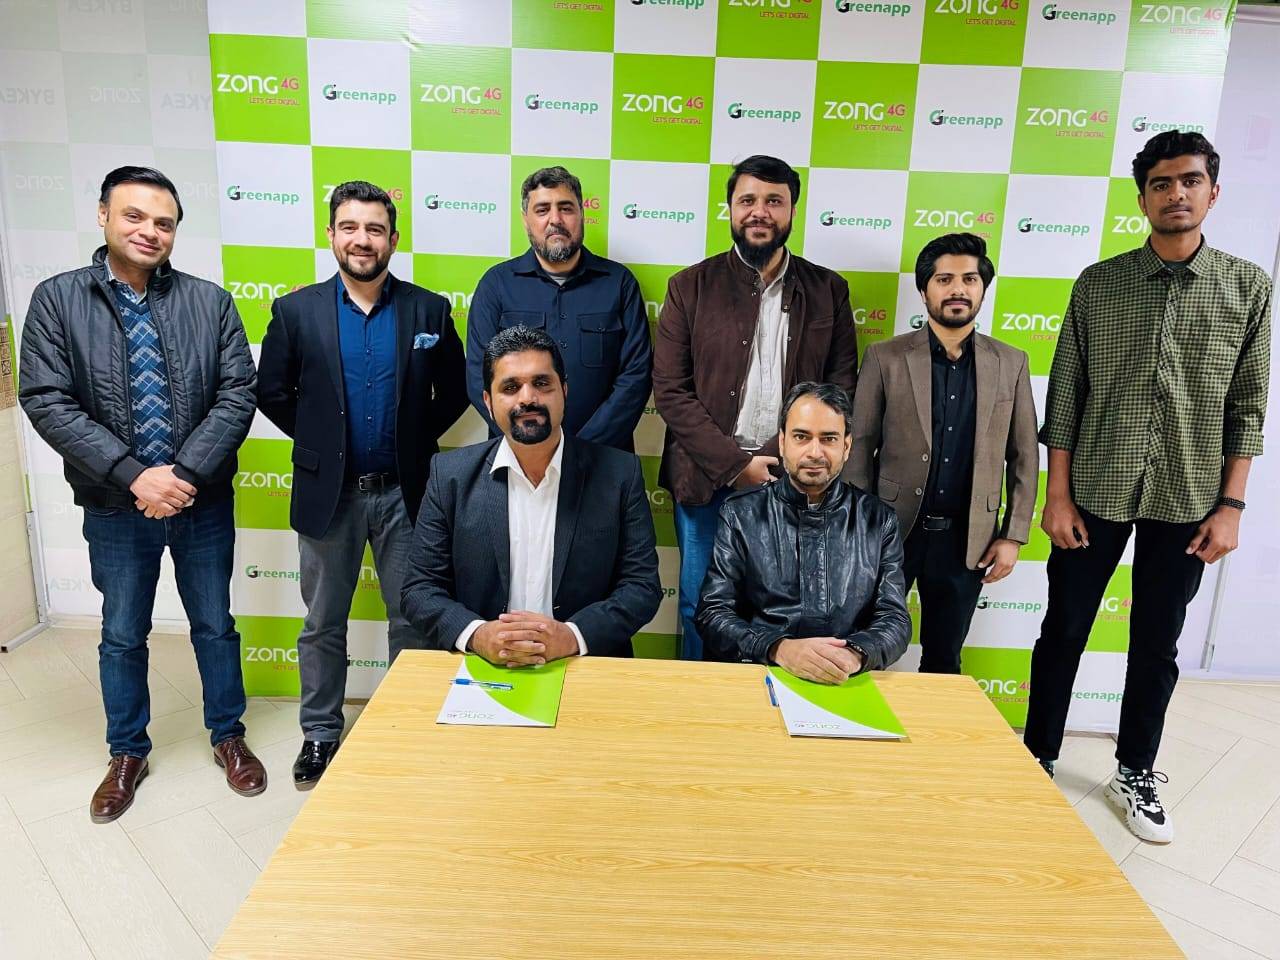 Zong 4G partners with Pakistan’s first intranet-based app, GreenApp, to offer exclusive services to customers